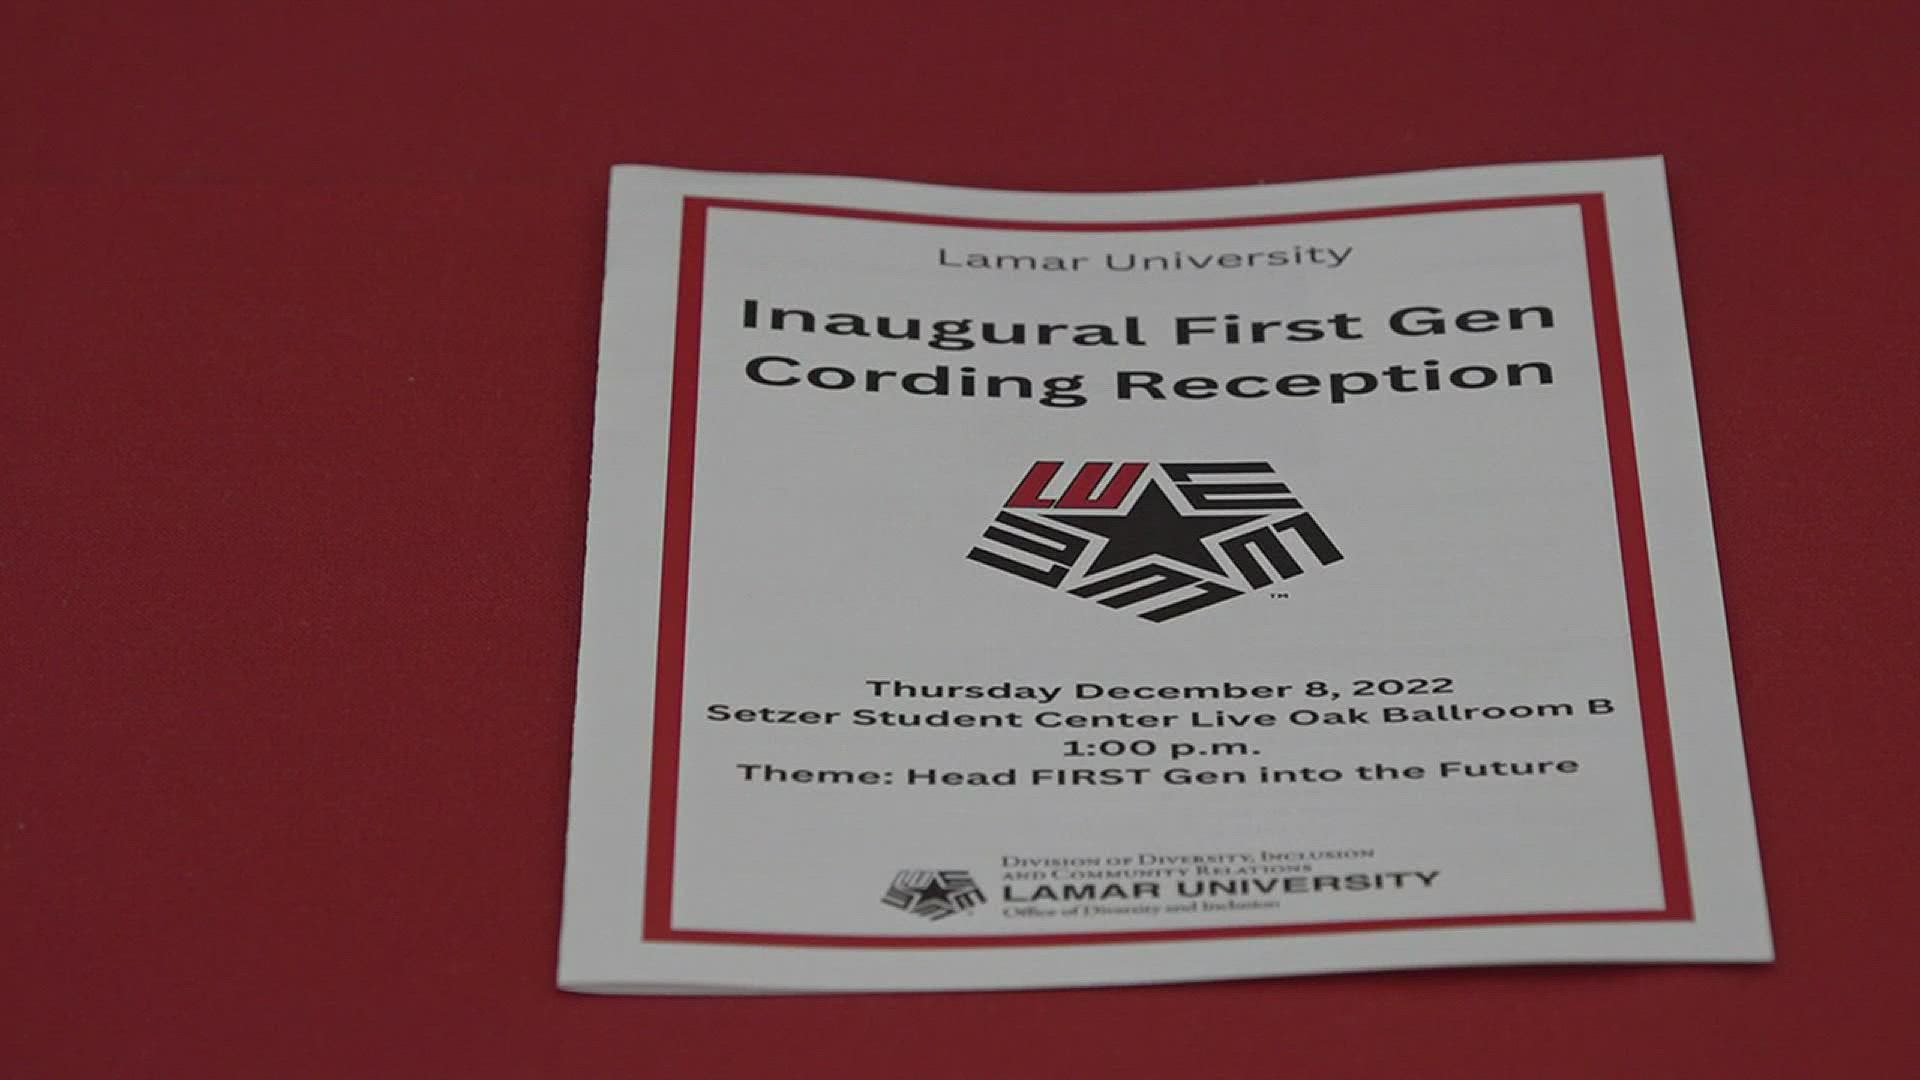 137 Lamar students were recognized at the college’s inaugural first generation student cording reception.